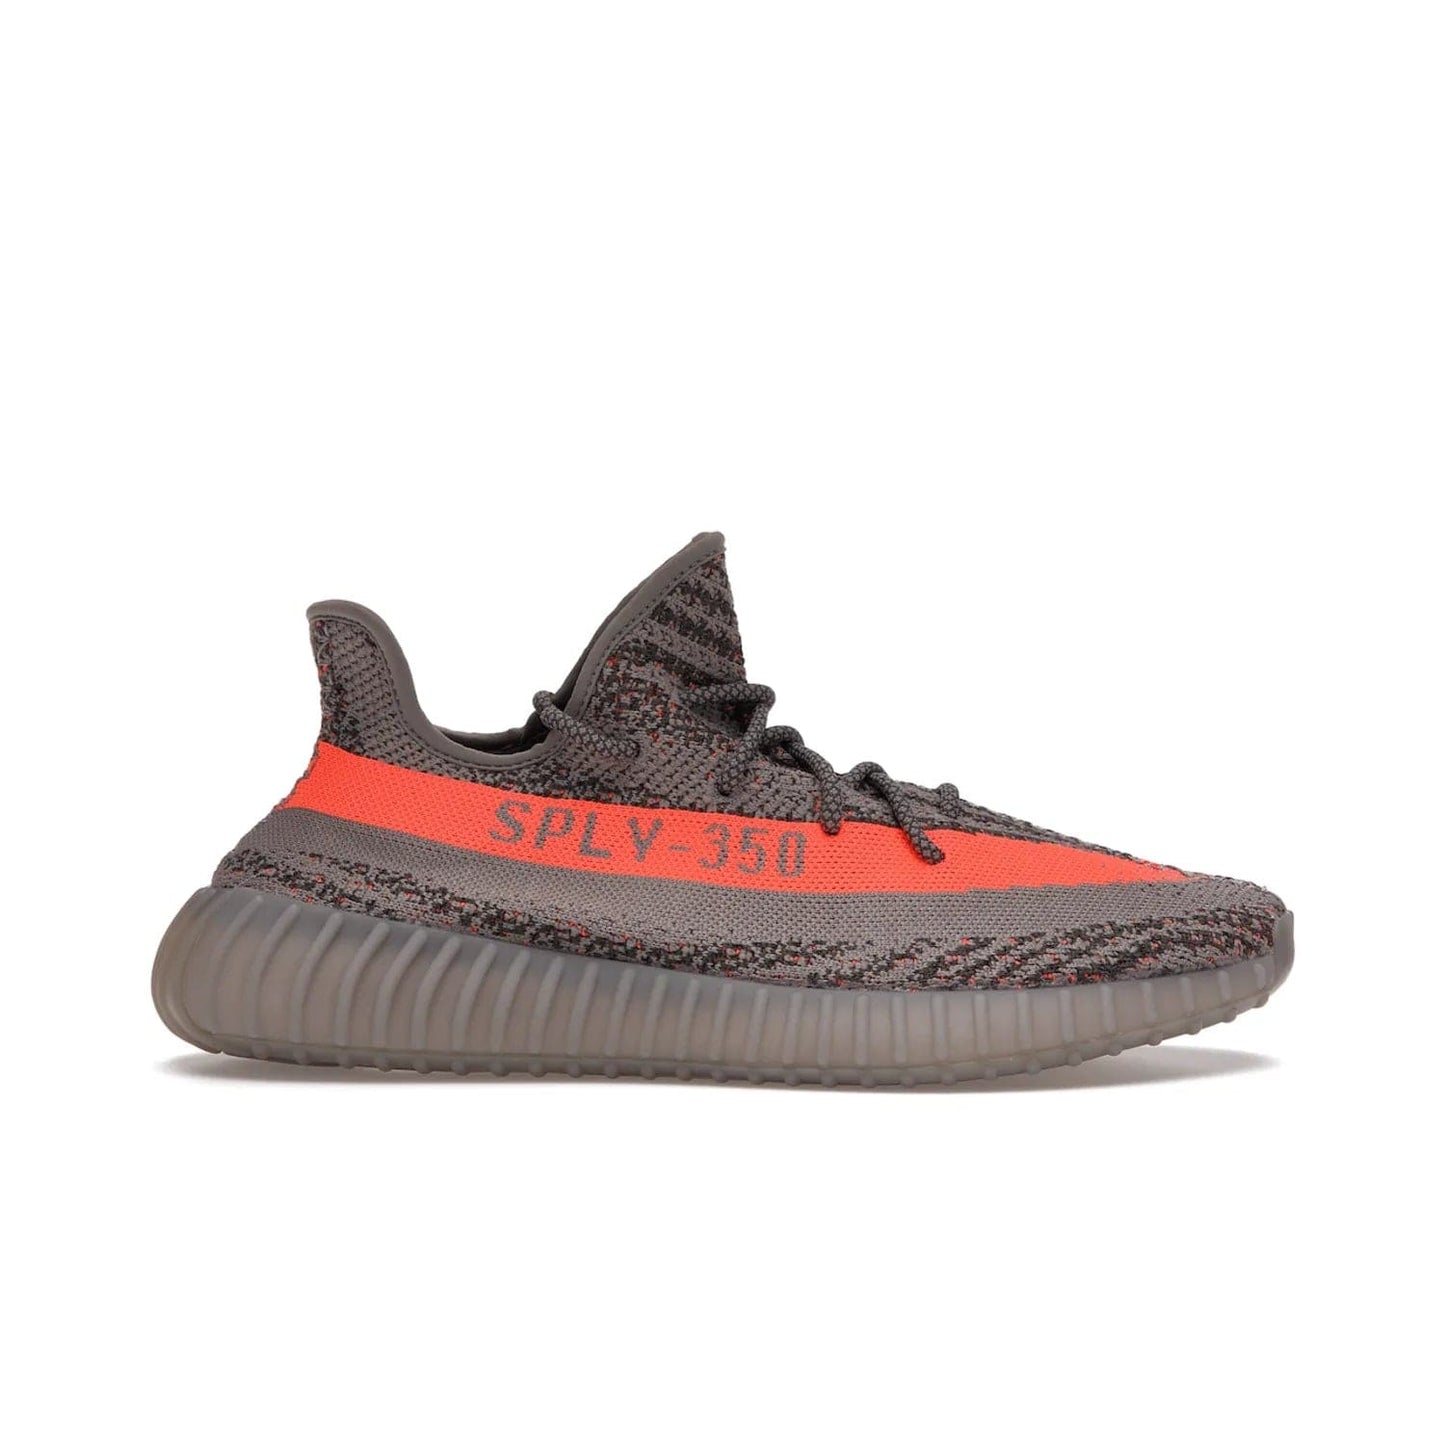 adidas Yeezy Boost 350 V2 Beluga Reflective - Image 1 - Only at www.BallersClubKickz.com - Shop the adidas Yeezy Boost 350 V2 Beluga Reflective: a stylish, reflective sneaker that stands out. Featuring Boost sole, Primeknit upper & signature orange stripe. Available Dec 2021.